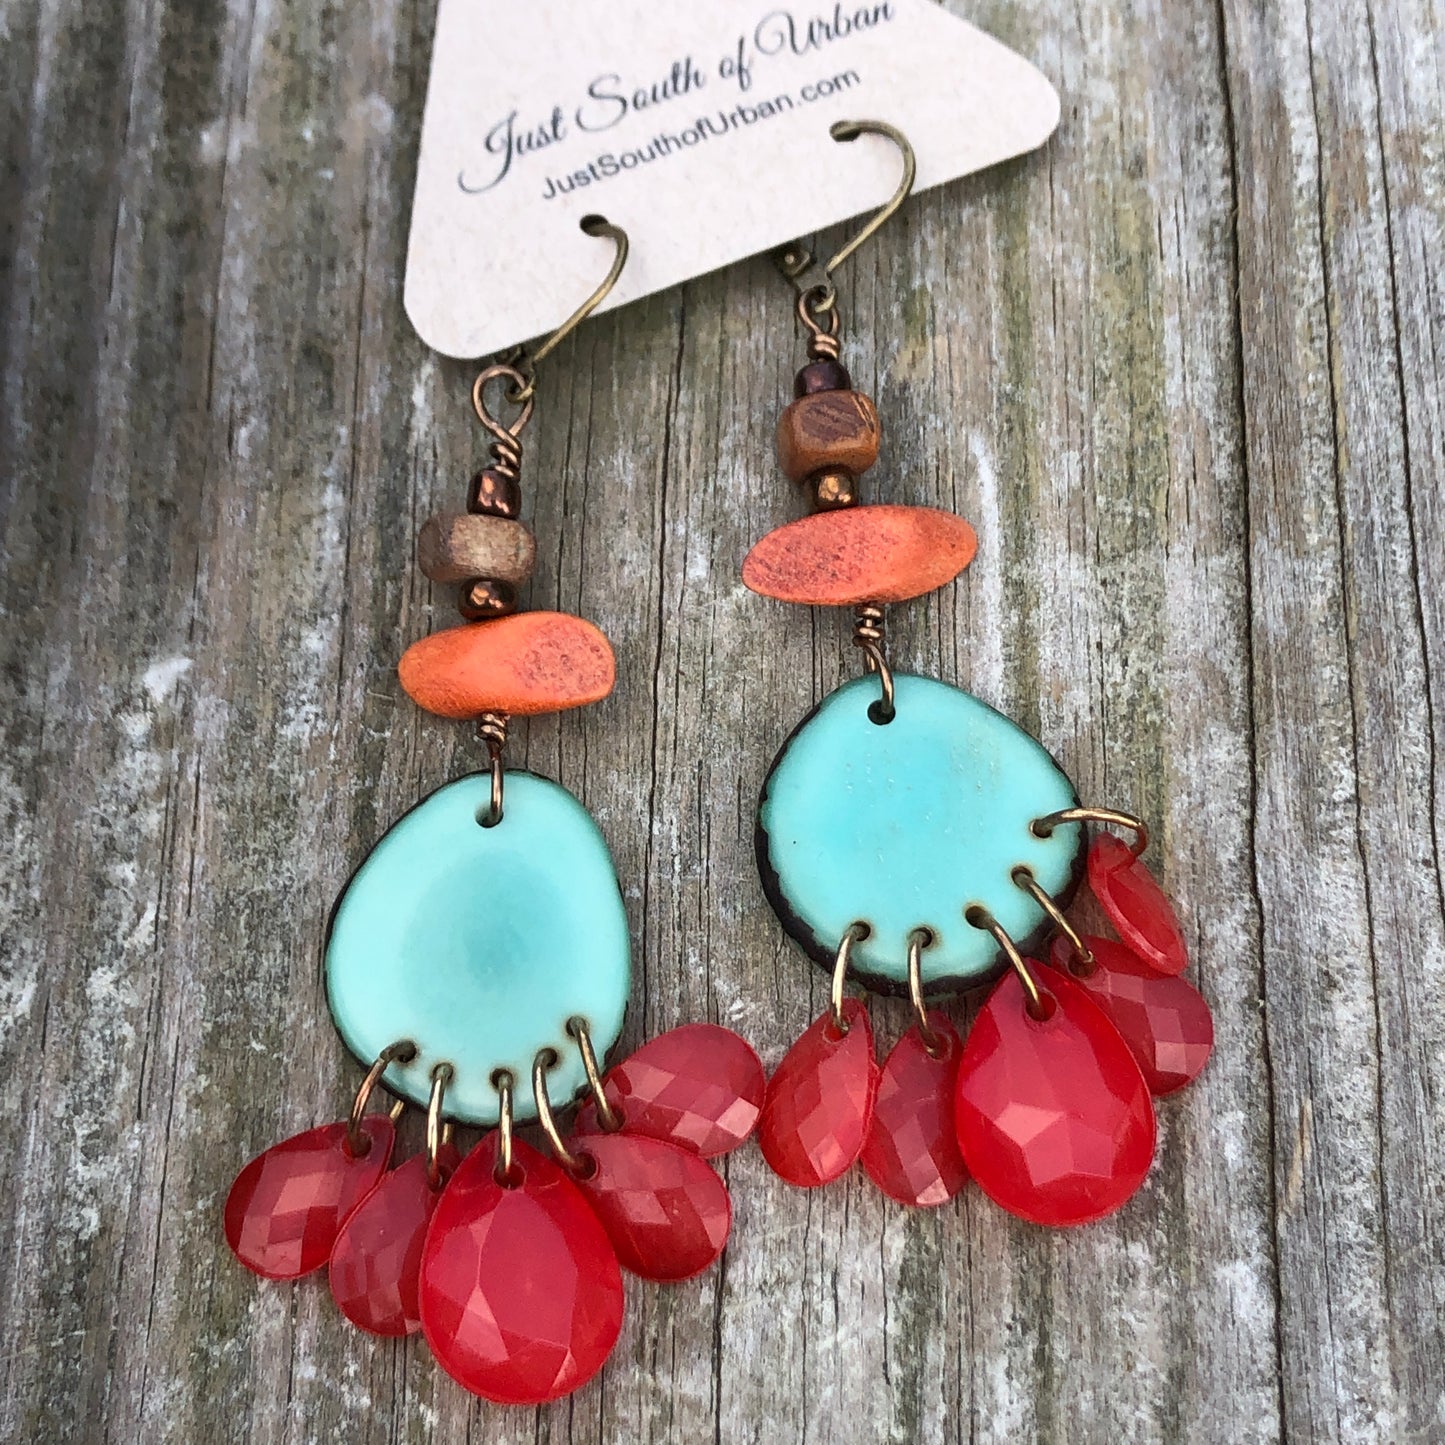 Tagua Nut and Vintage Jewelry Upcycled Earrings